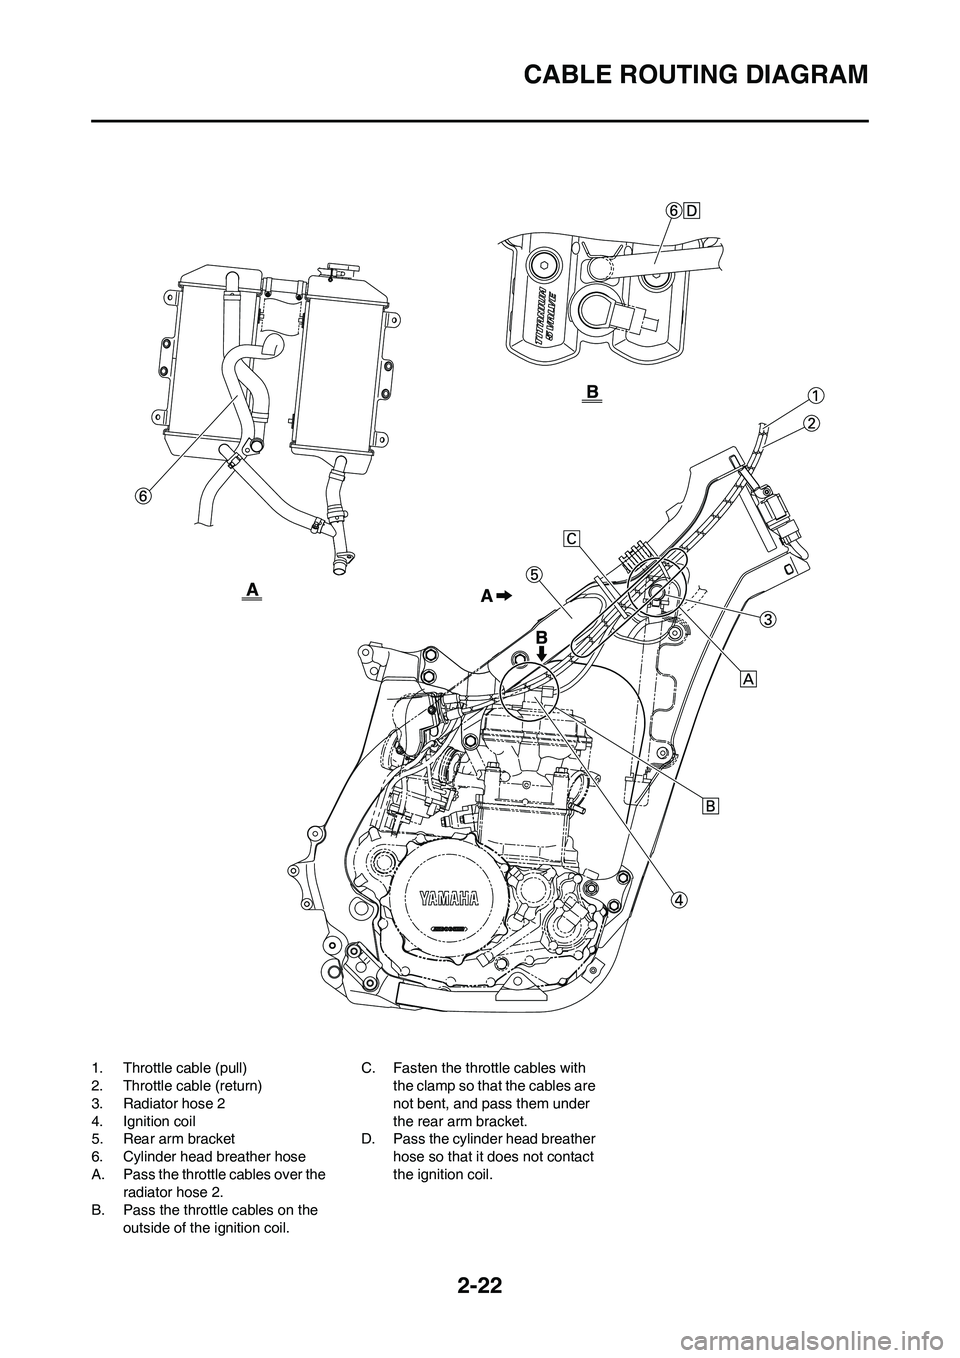 YAMAHA YZ450F 2009 Service Manual 2-22
CABLE ROUTING DIAGRAM
1. Throttle cable (pull)
2. Throttle cable (return)
3. Radiator hose 2
4. Ignition coil
5. Rear arm bracket
6. Cylinder head breather hose
A. Pass the throttle cables over t